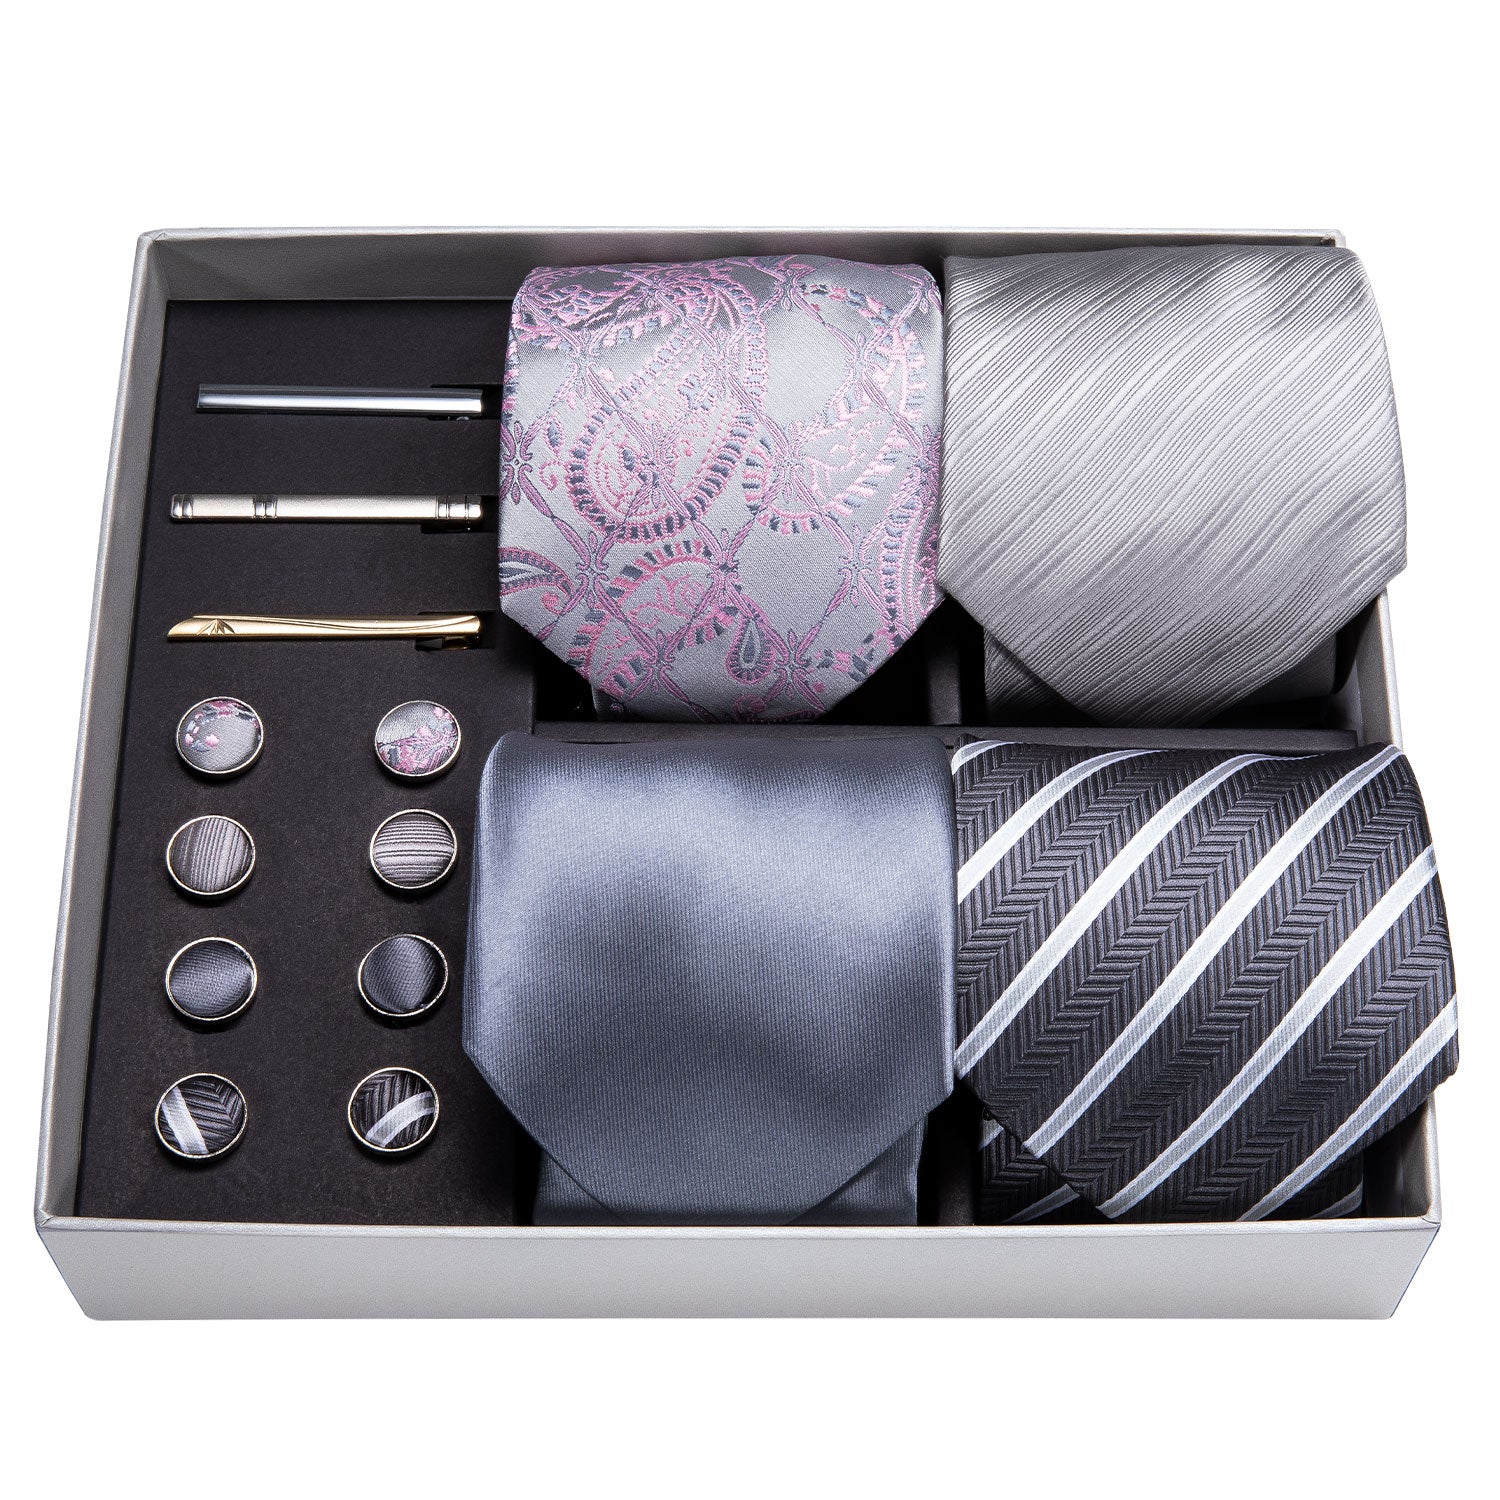 Peach Stripe Tie |Buy Neck Tie Pocket Square and Lapel Pin Gift Set Online  In India|